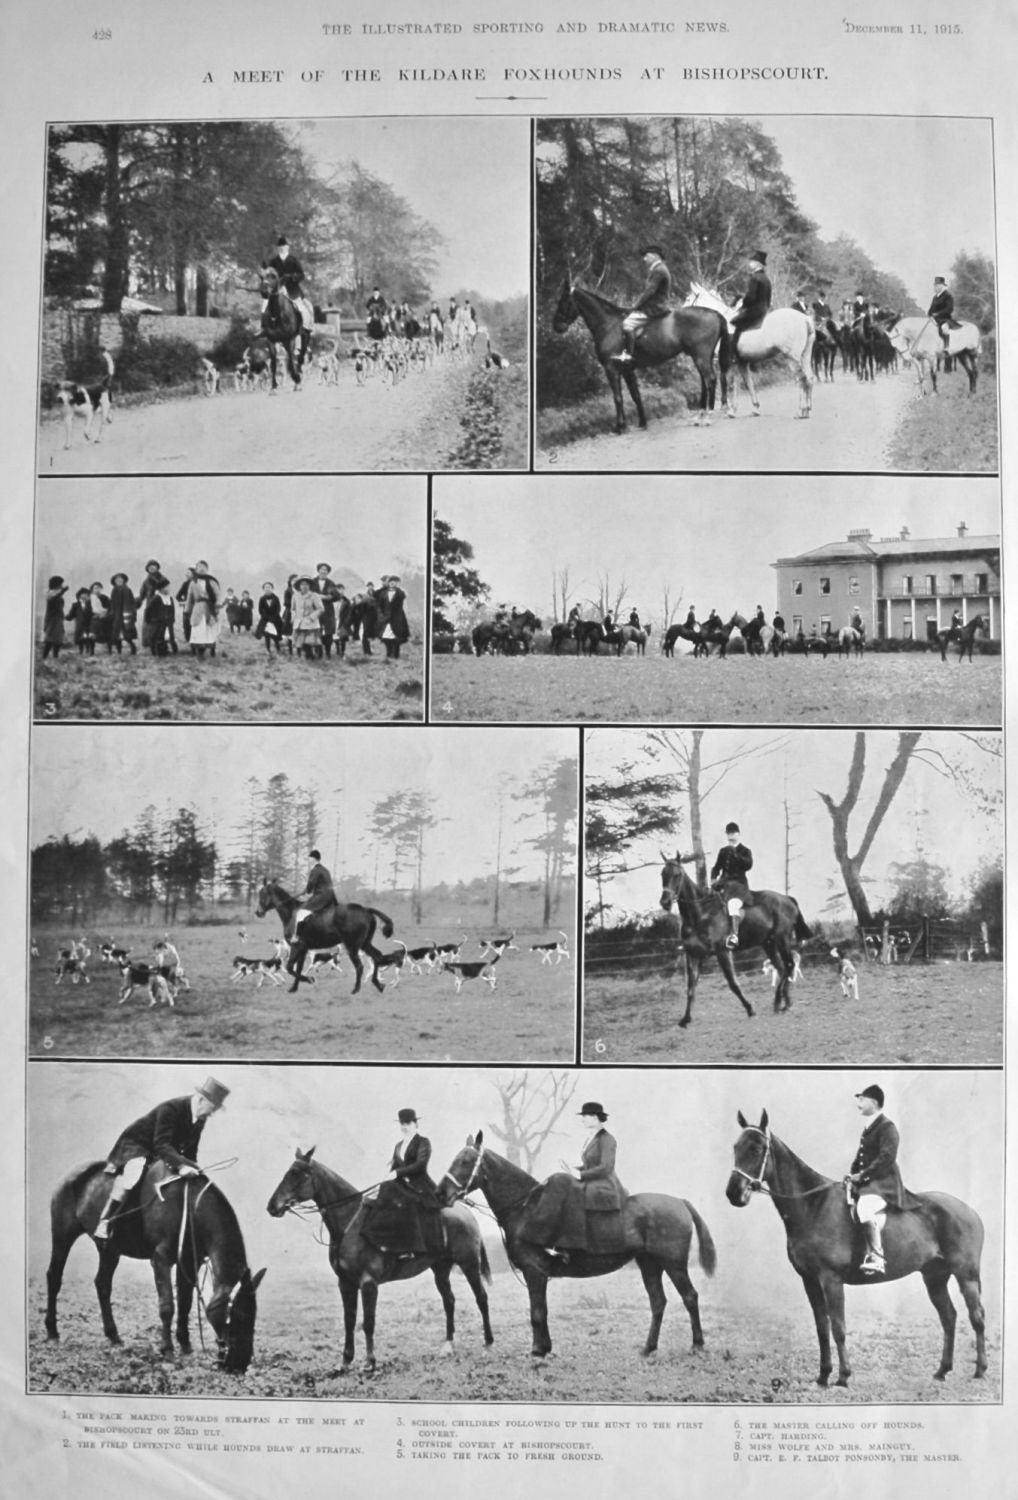 A Meet of the Kildare Foxhounds at Bishopscourt.  1915.